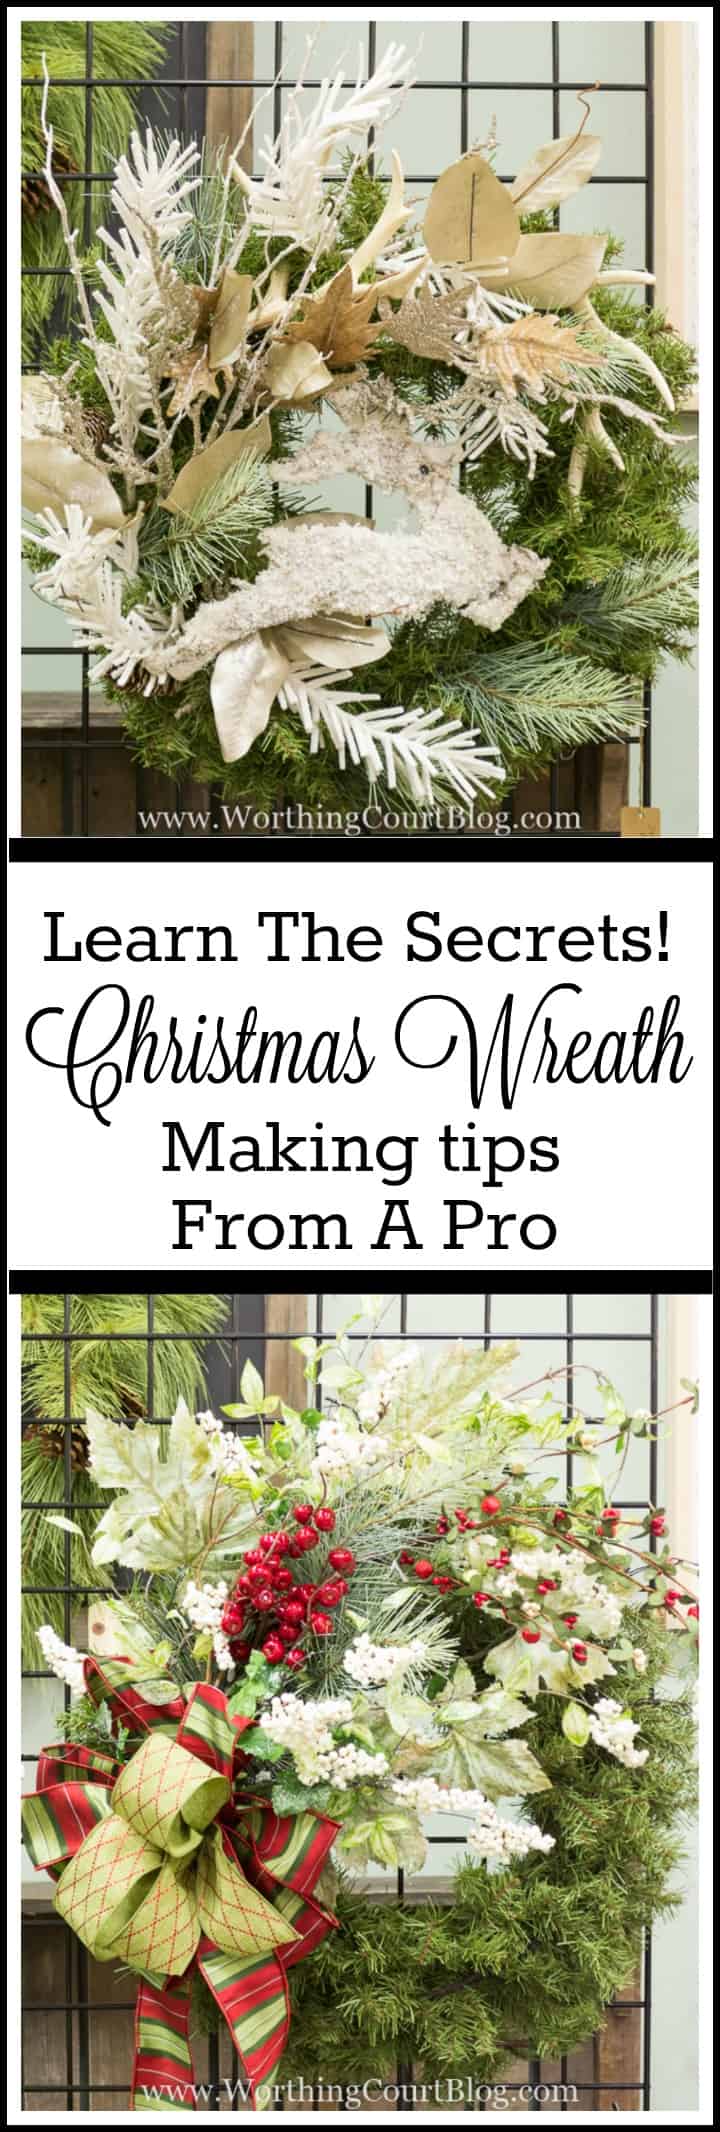 How To Decorate A Christmas Wreath - Directions From A Pro.